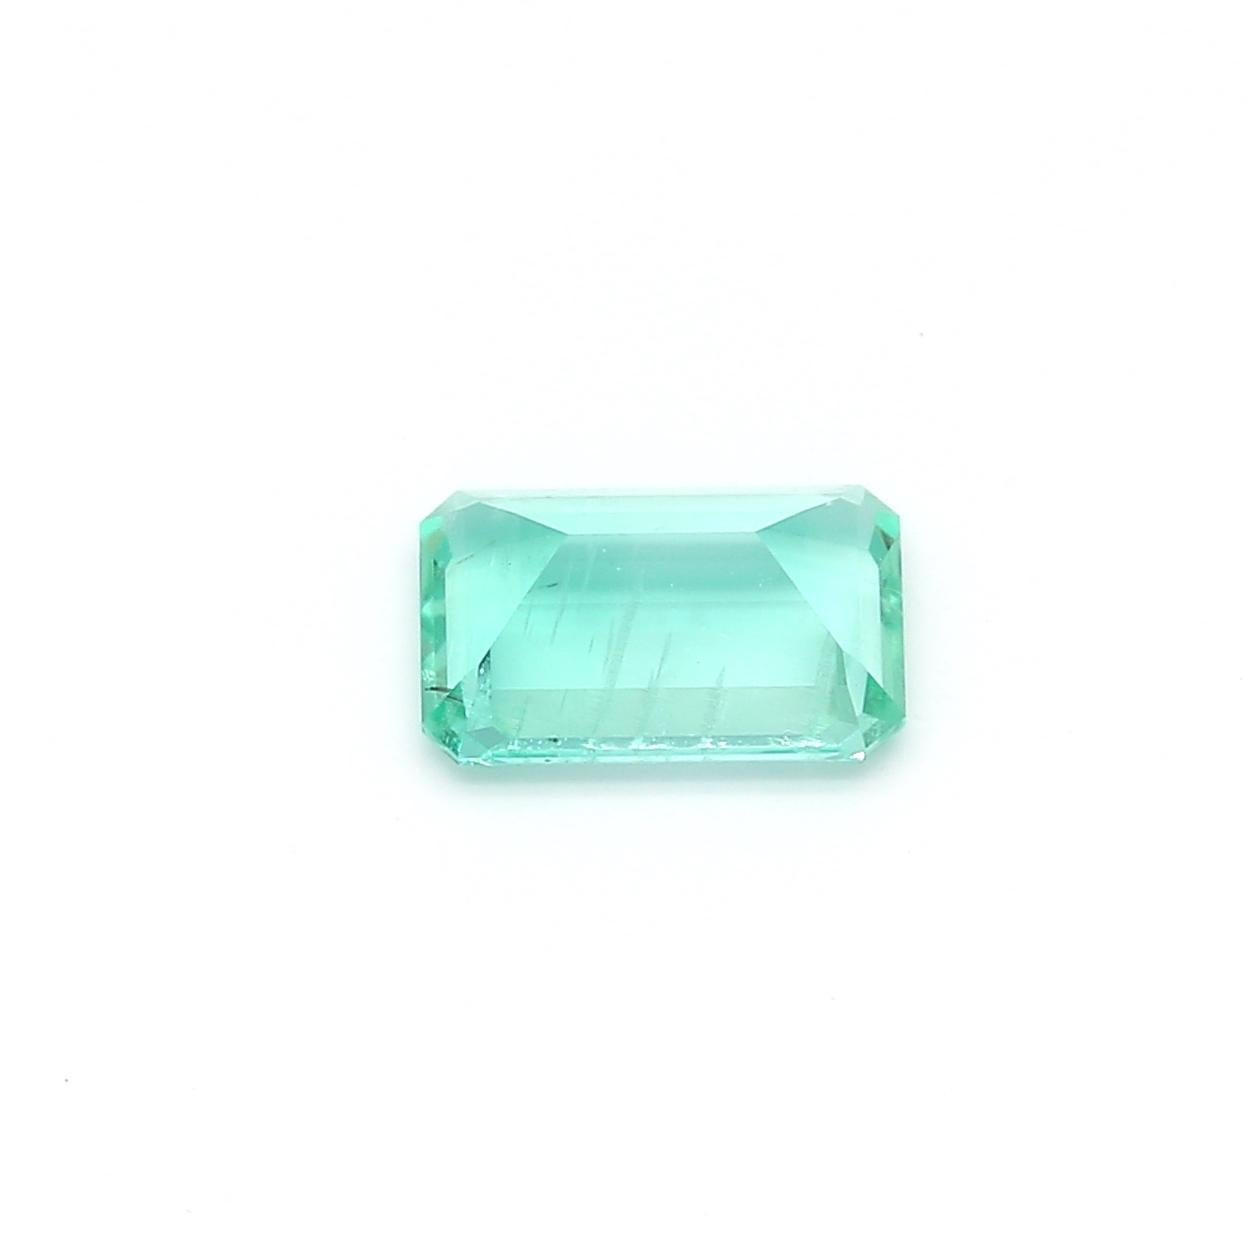 Emerald cut are a popular choice in the gemstone industry, and are considered to be the most beautiful among other emerald shapes.
This exceptional quality 1.27 gemstone would make a custom-made jewelry design. Perfect for a Ring or Pendant.

Shape